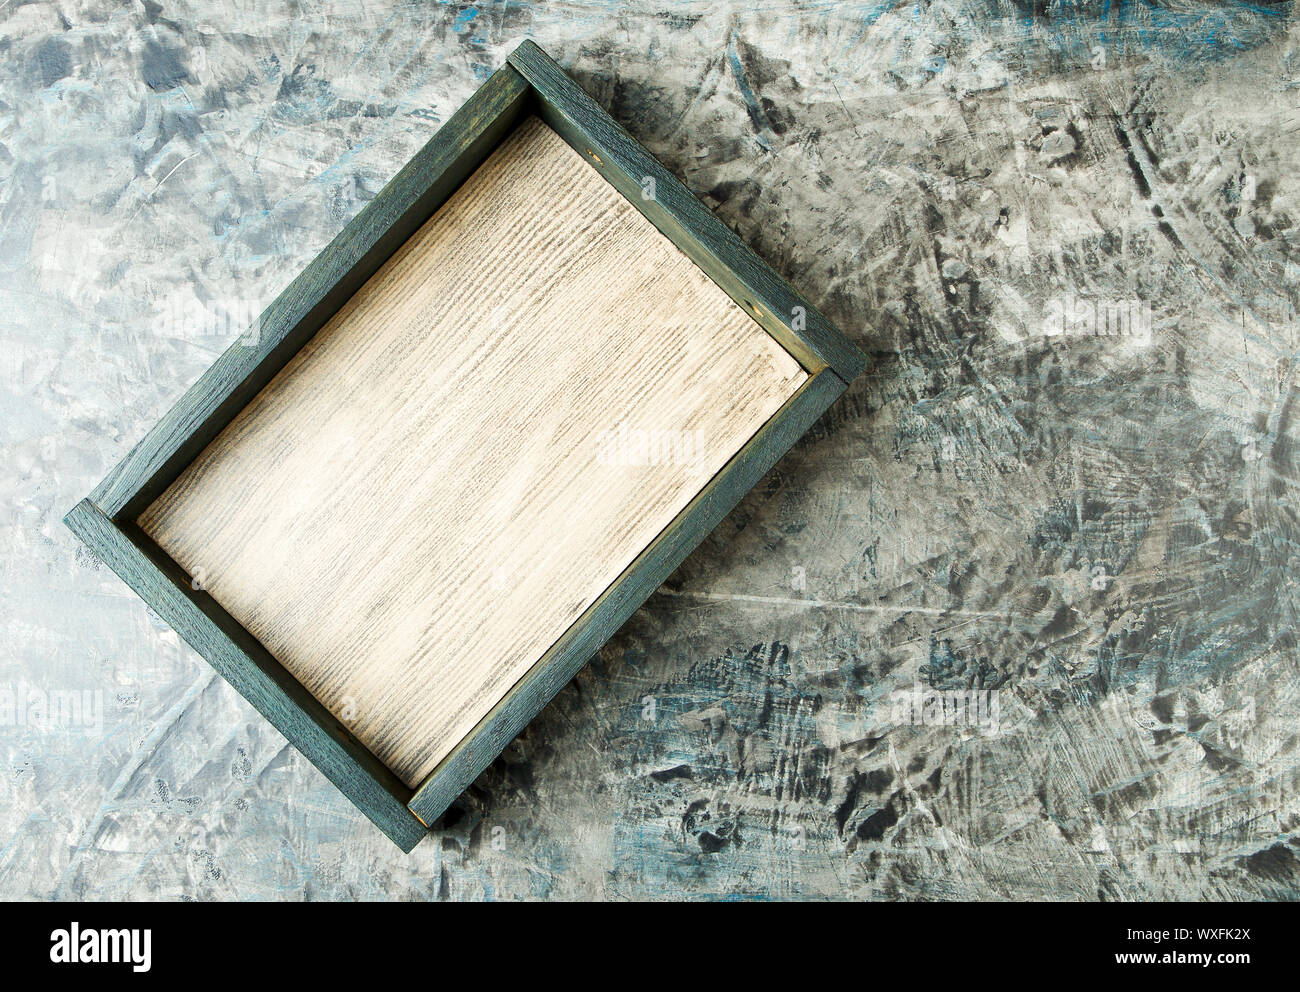 TEXTURE BOX ON BACKGROUND. A WOODEN BOX STANDS ON A DARK FACE BACKGROUND. Stock Photo